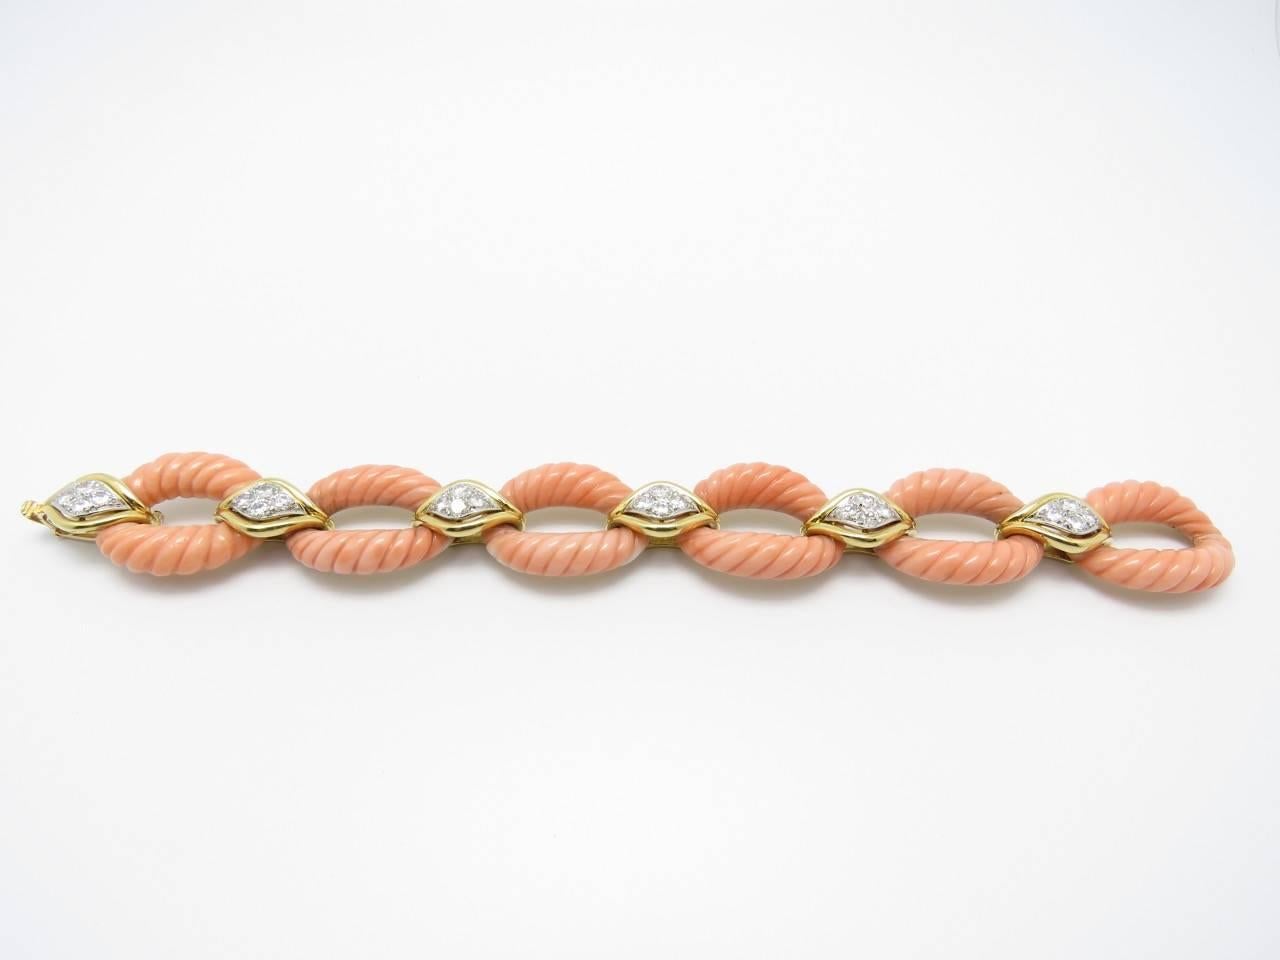 Charming coral and diamonds set on yellow gold are a delightful match of color and design for this  chain bracelet.  
French jewelry.
Marked: OJ Perrin Paris
Measurements:
Gold and Coral Link: 2,.8 x 2.2 cm
Gold and Diamond Link:1.8x1